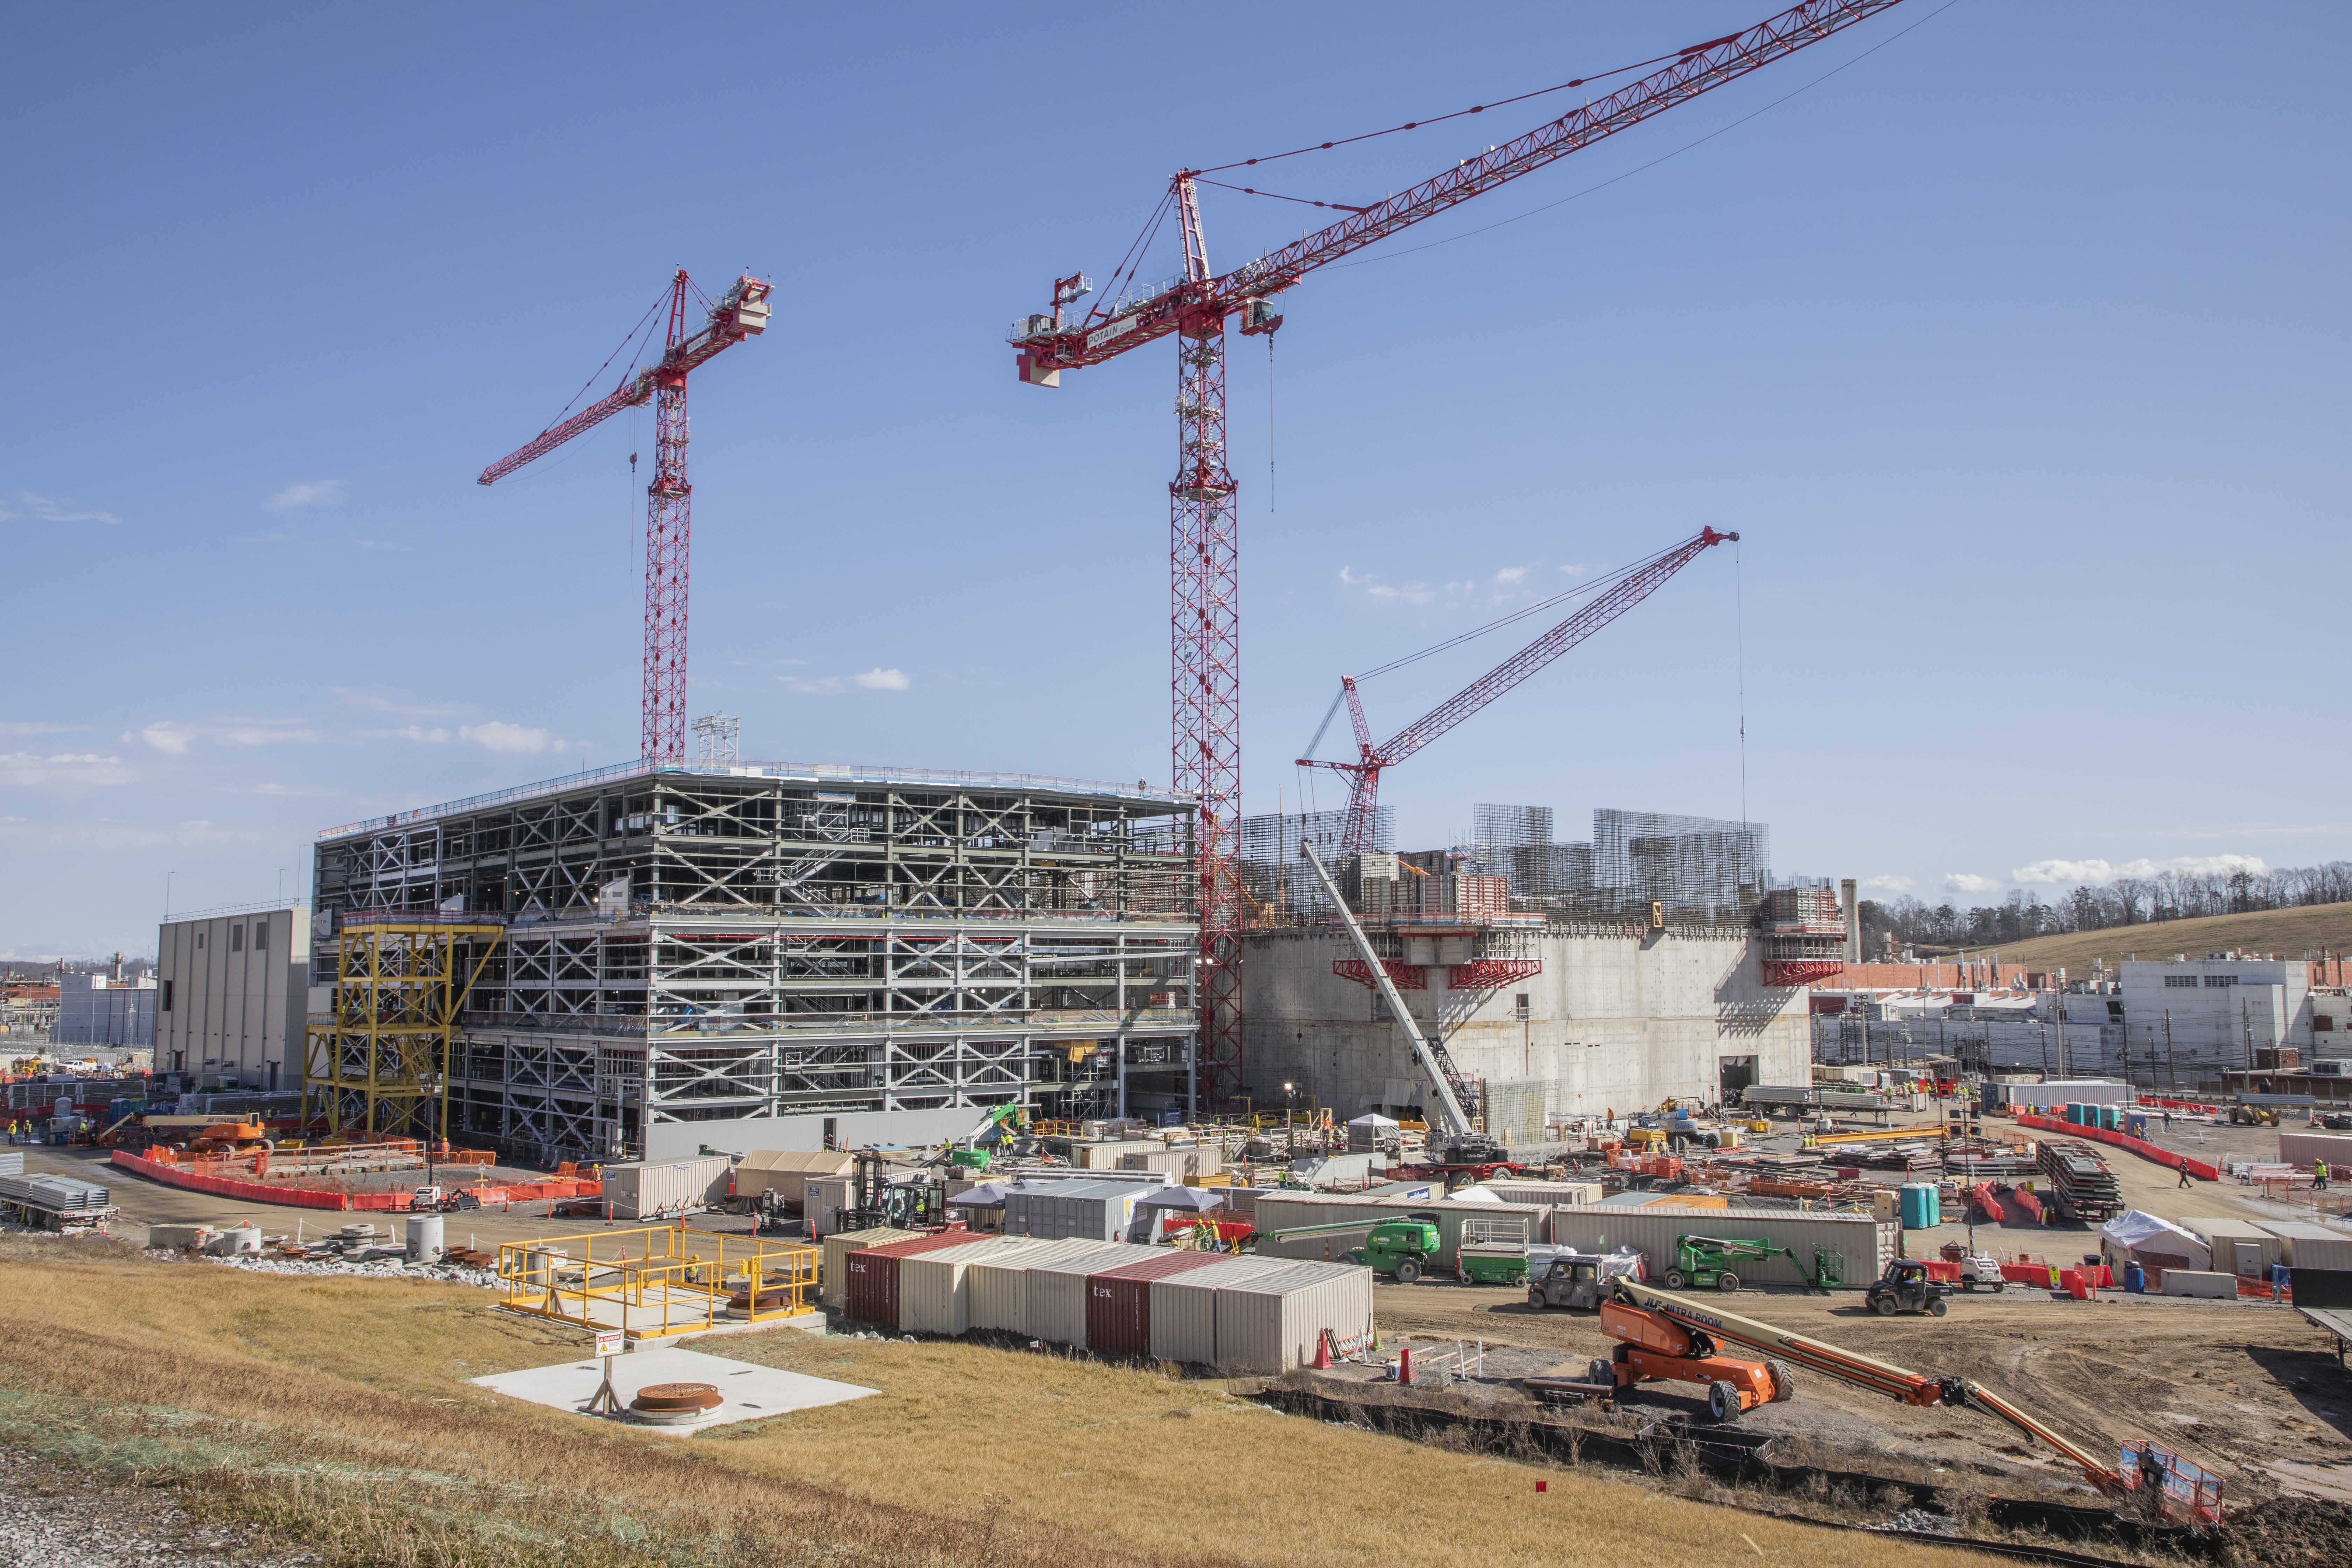 What started as concrete foundations, structural steel, and rebar two years ago is now three prominent buildings that, when finished, will support the Uranium Mission Strategy, ensuring the long-term viability, safety, and security of enriched uranium capabilities in the U.S.